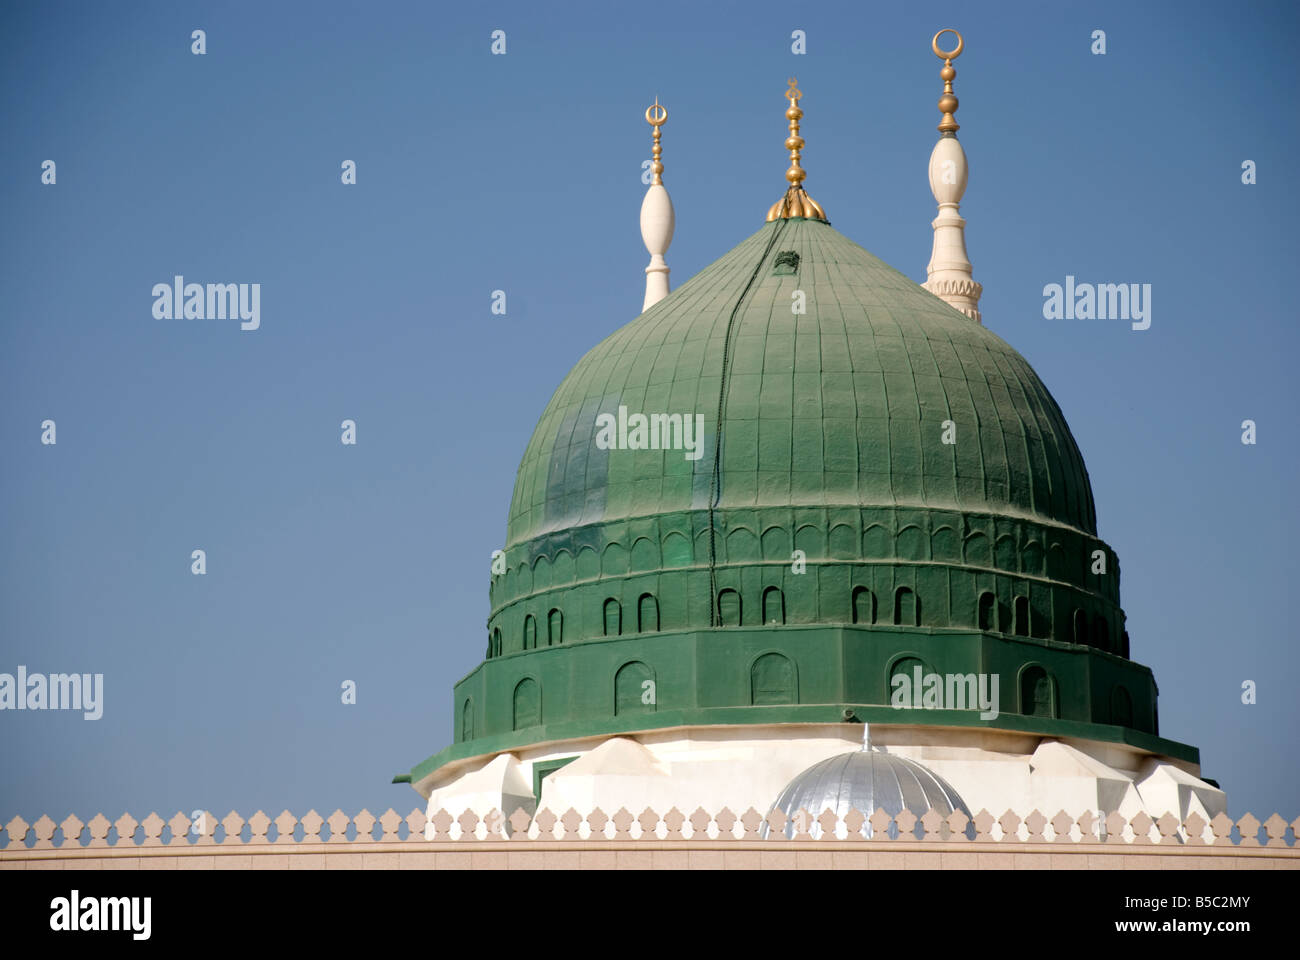 The green dome of Masjid al Nabawi in Madinah under which the Prophet Muhammed is buried Saudi Arabia Stock Photo